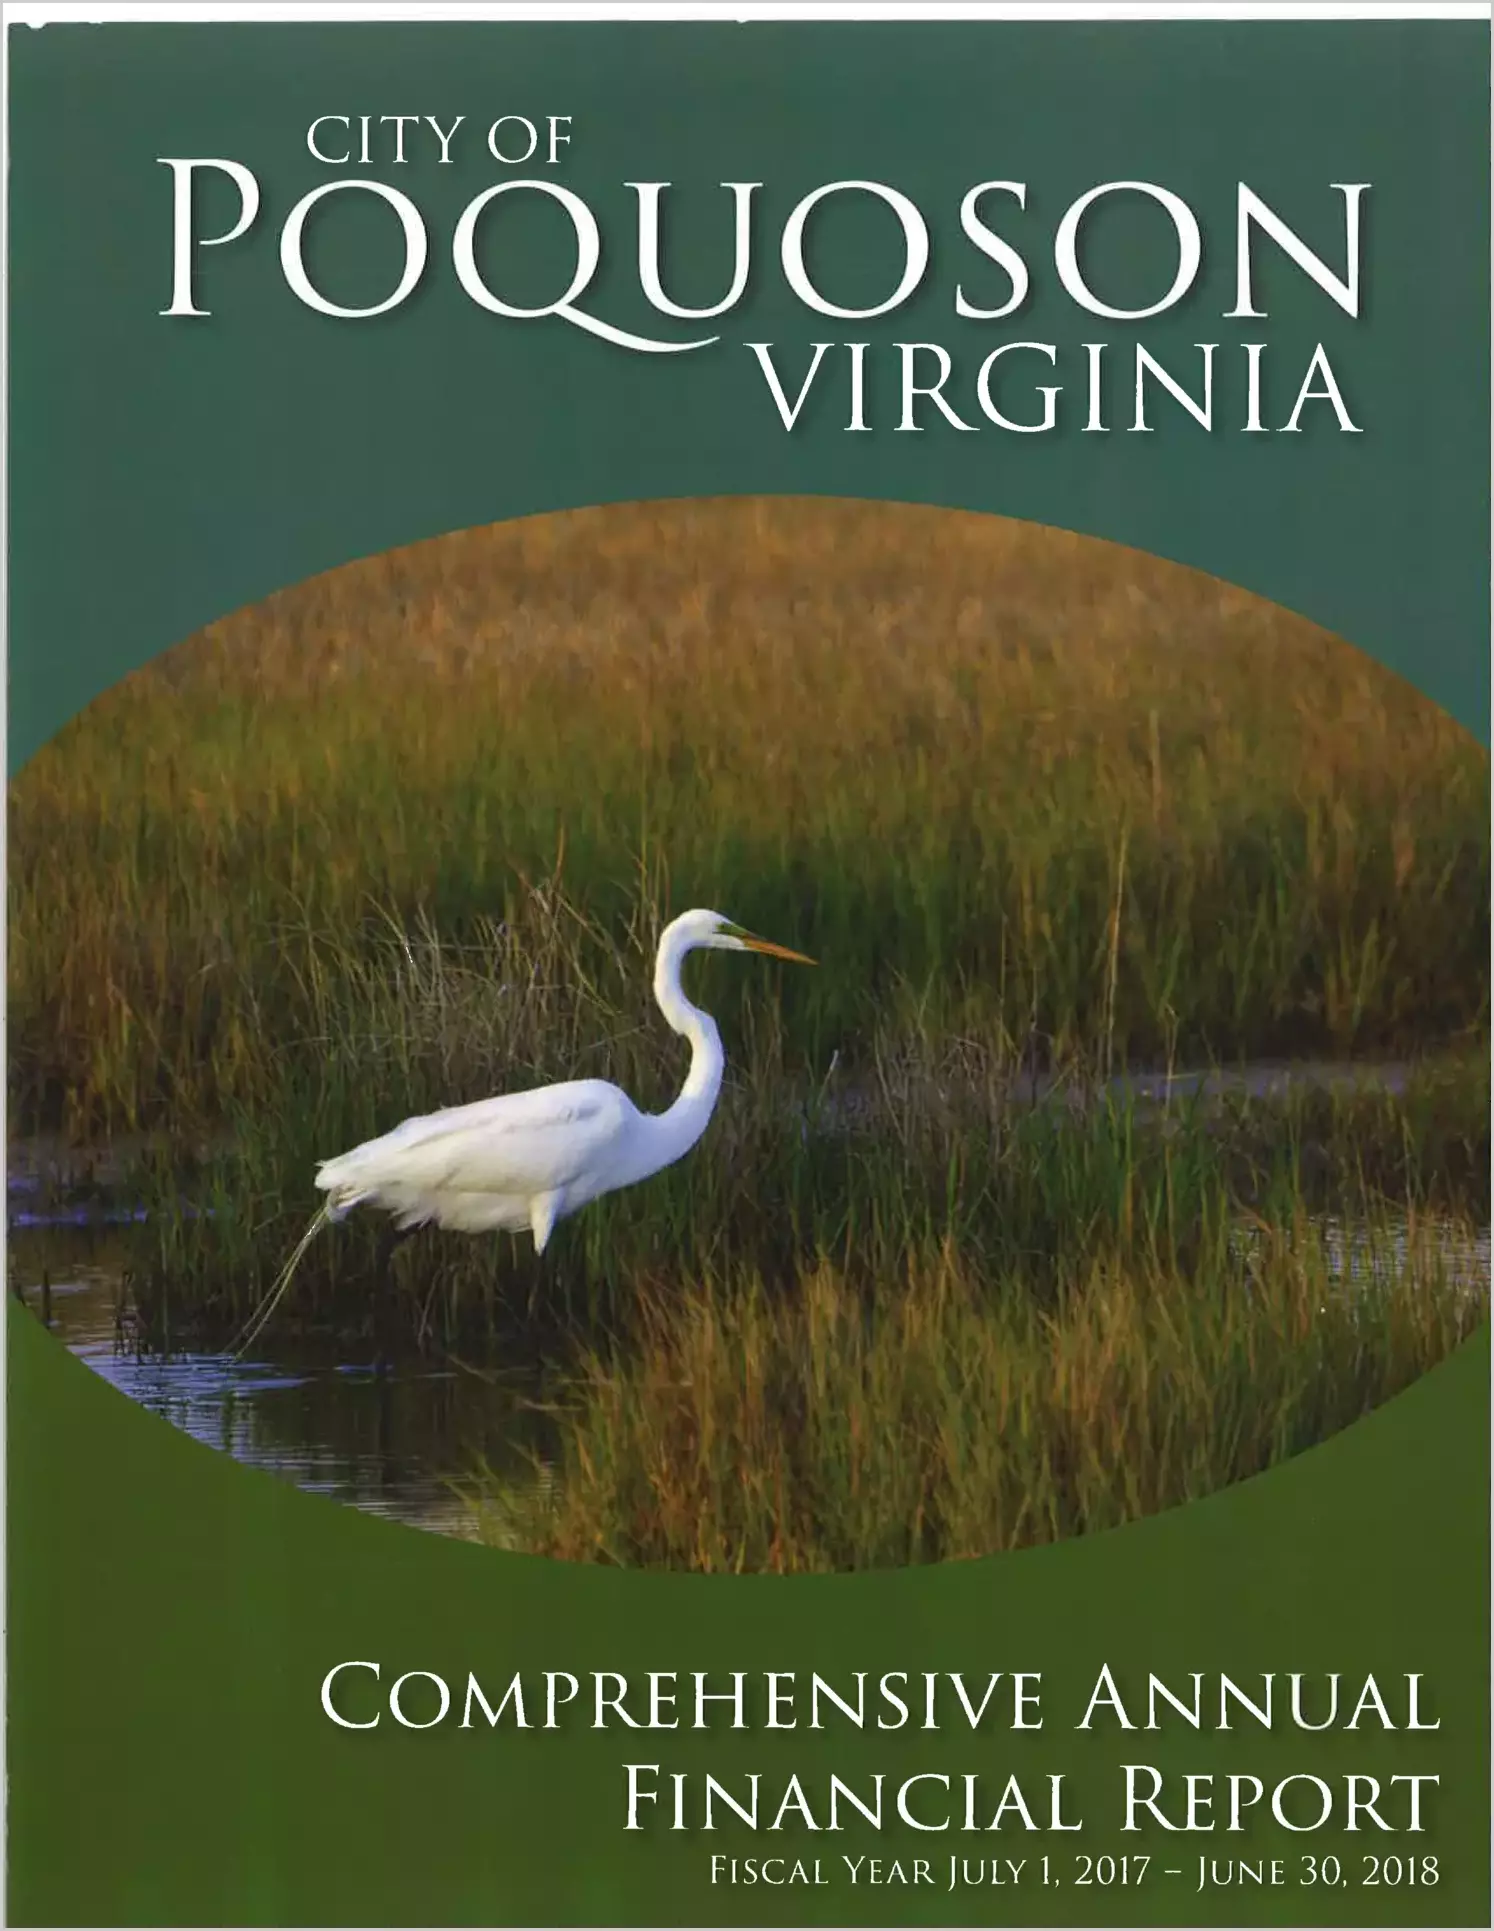 2018 Annual Financial Report for City of Poquoson